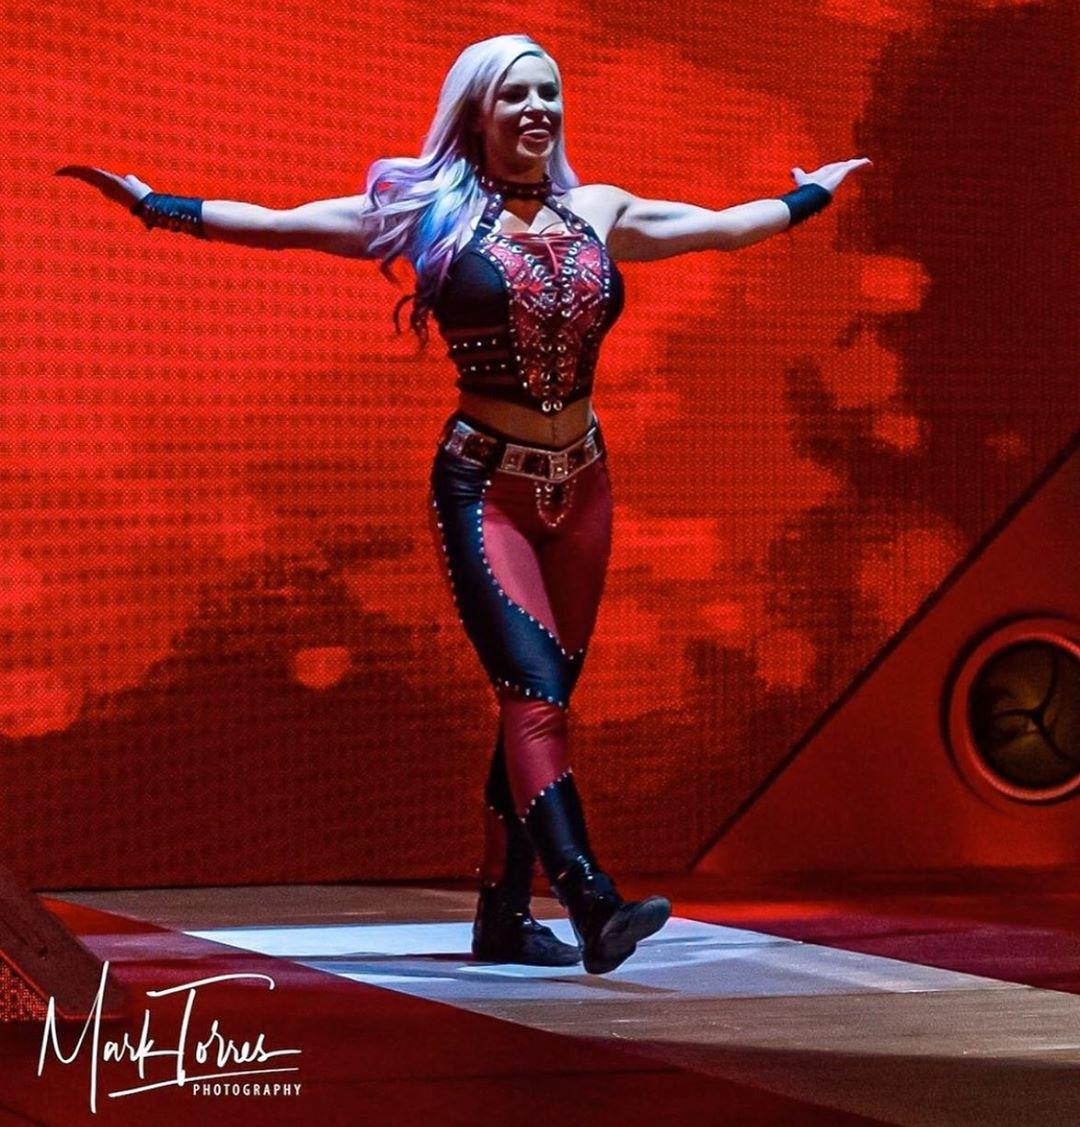 70+ Hot Pictures Of Dana Brooke Show Off This WWE Diva’s Sexy Body 20